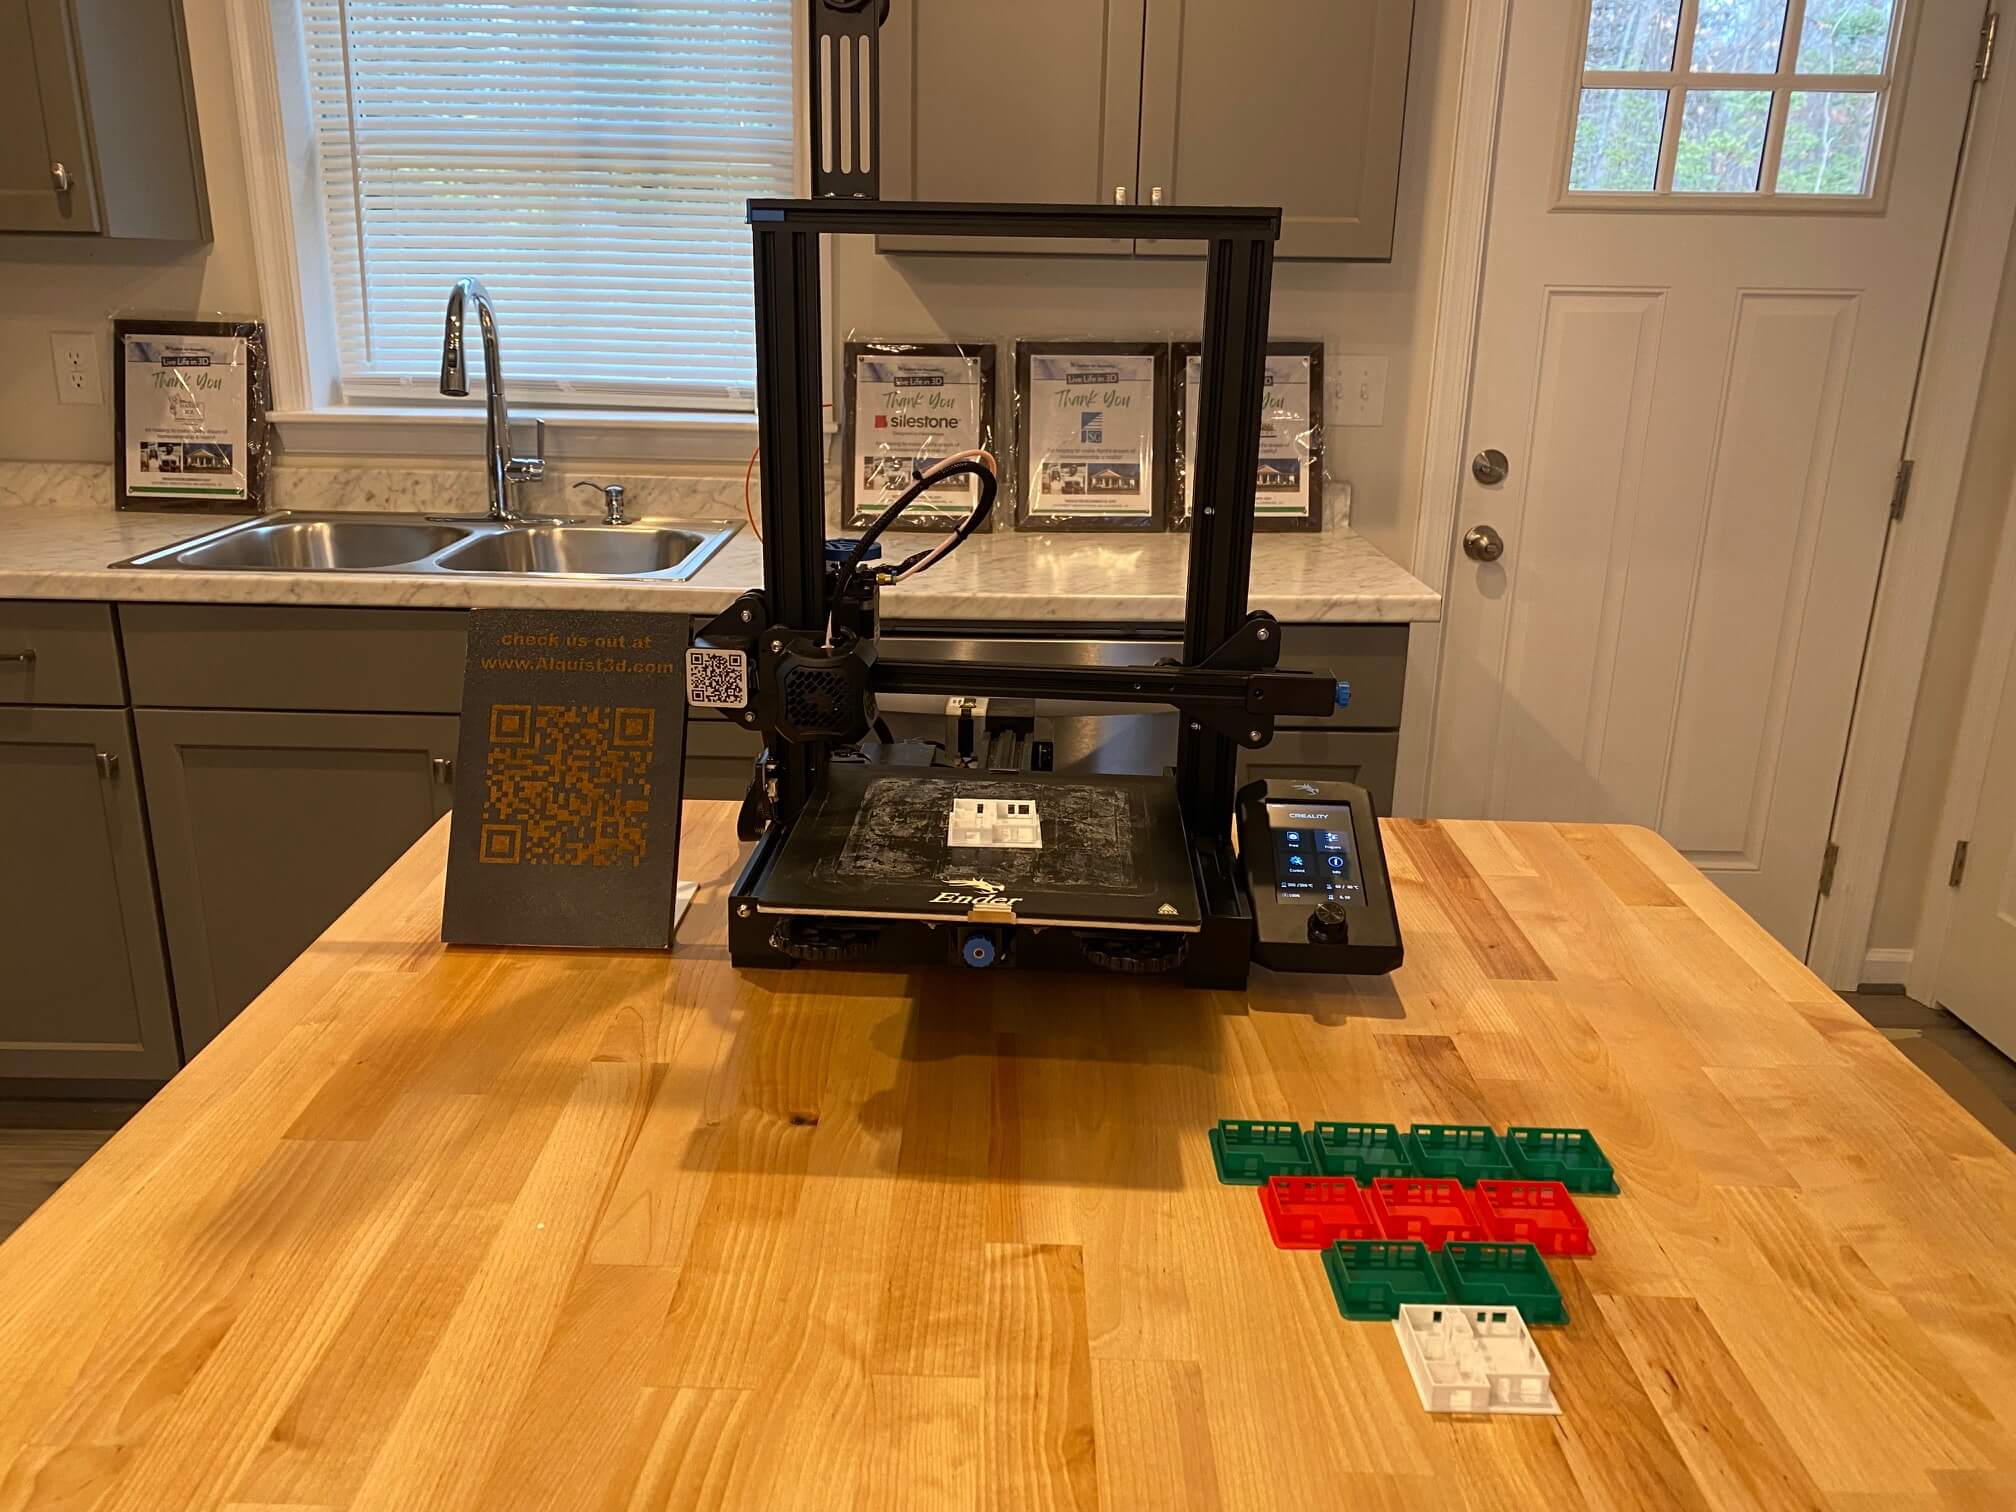 a tabletop 3d printer on display in a kitchen